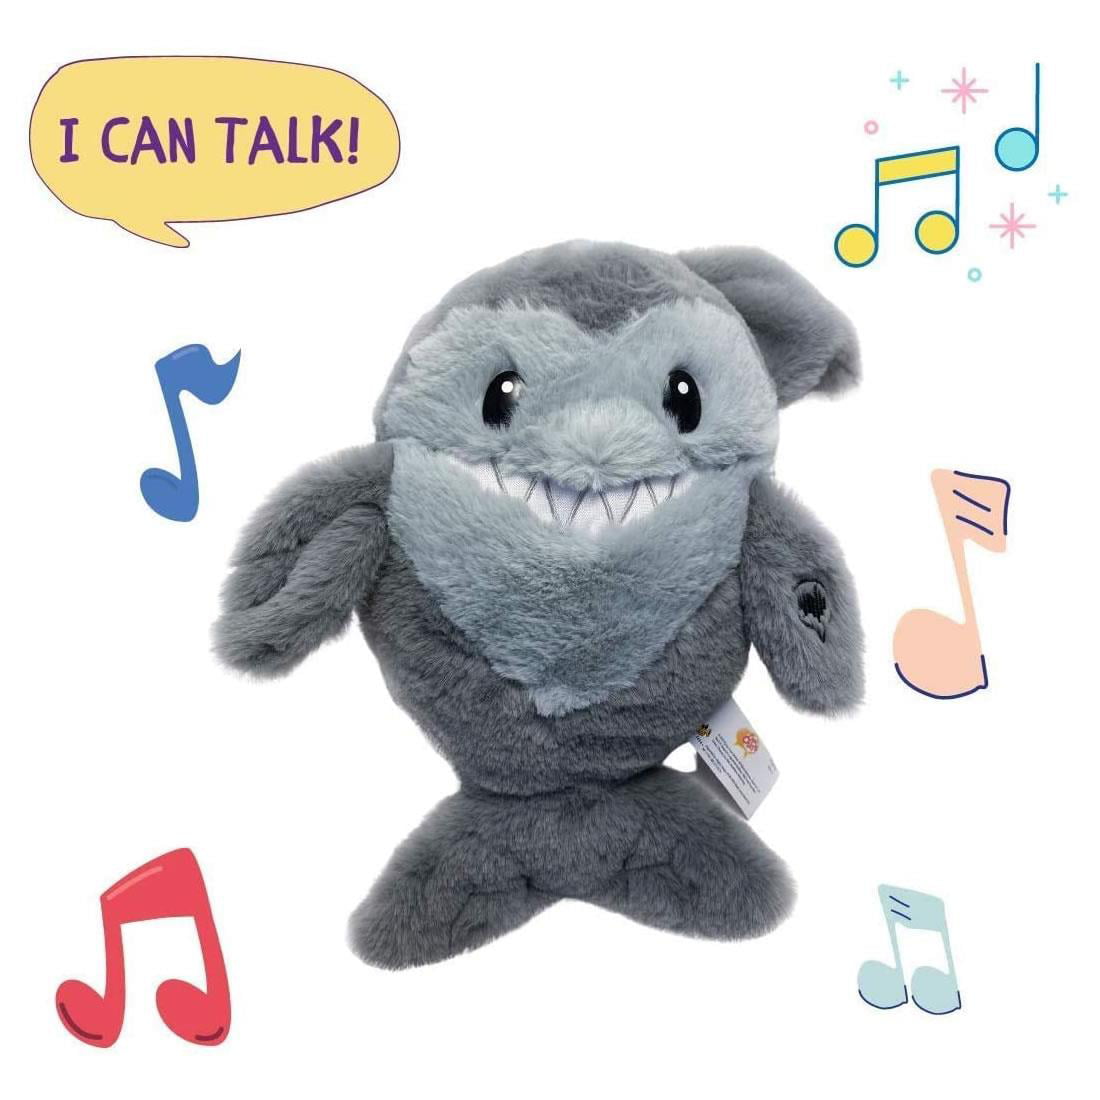 New Toddler Kids Talk Back Plush Soft Unicorn Toy that Repeats What You Say 